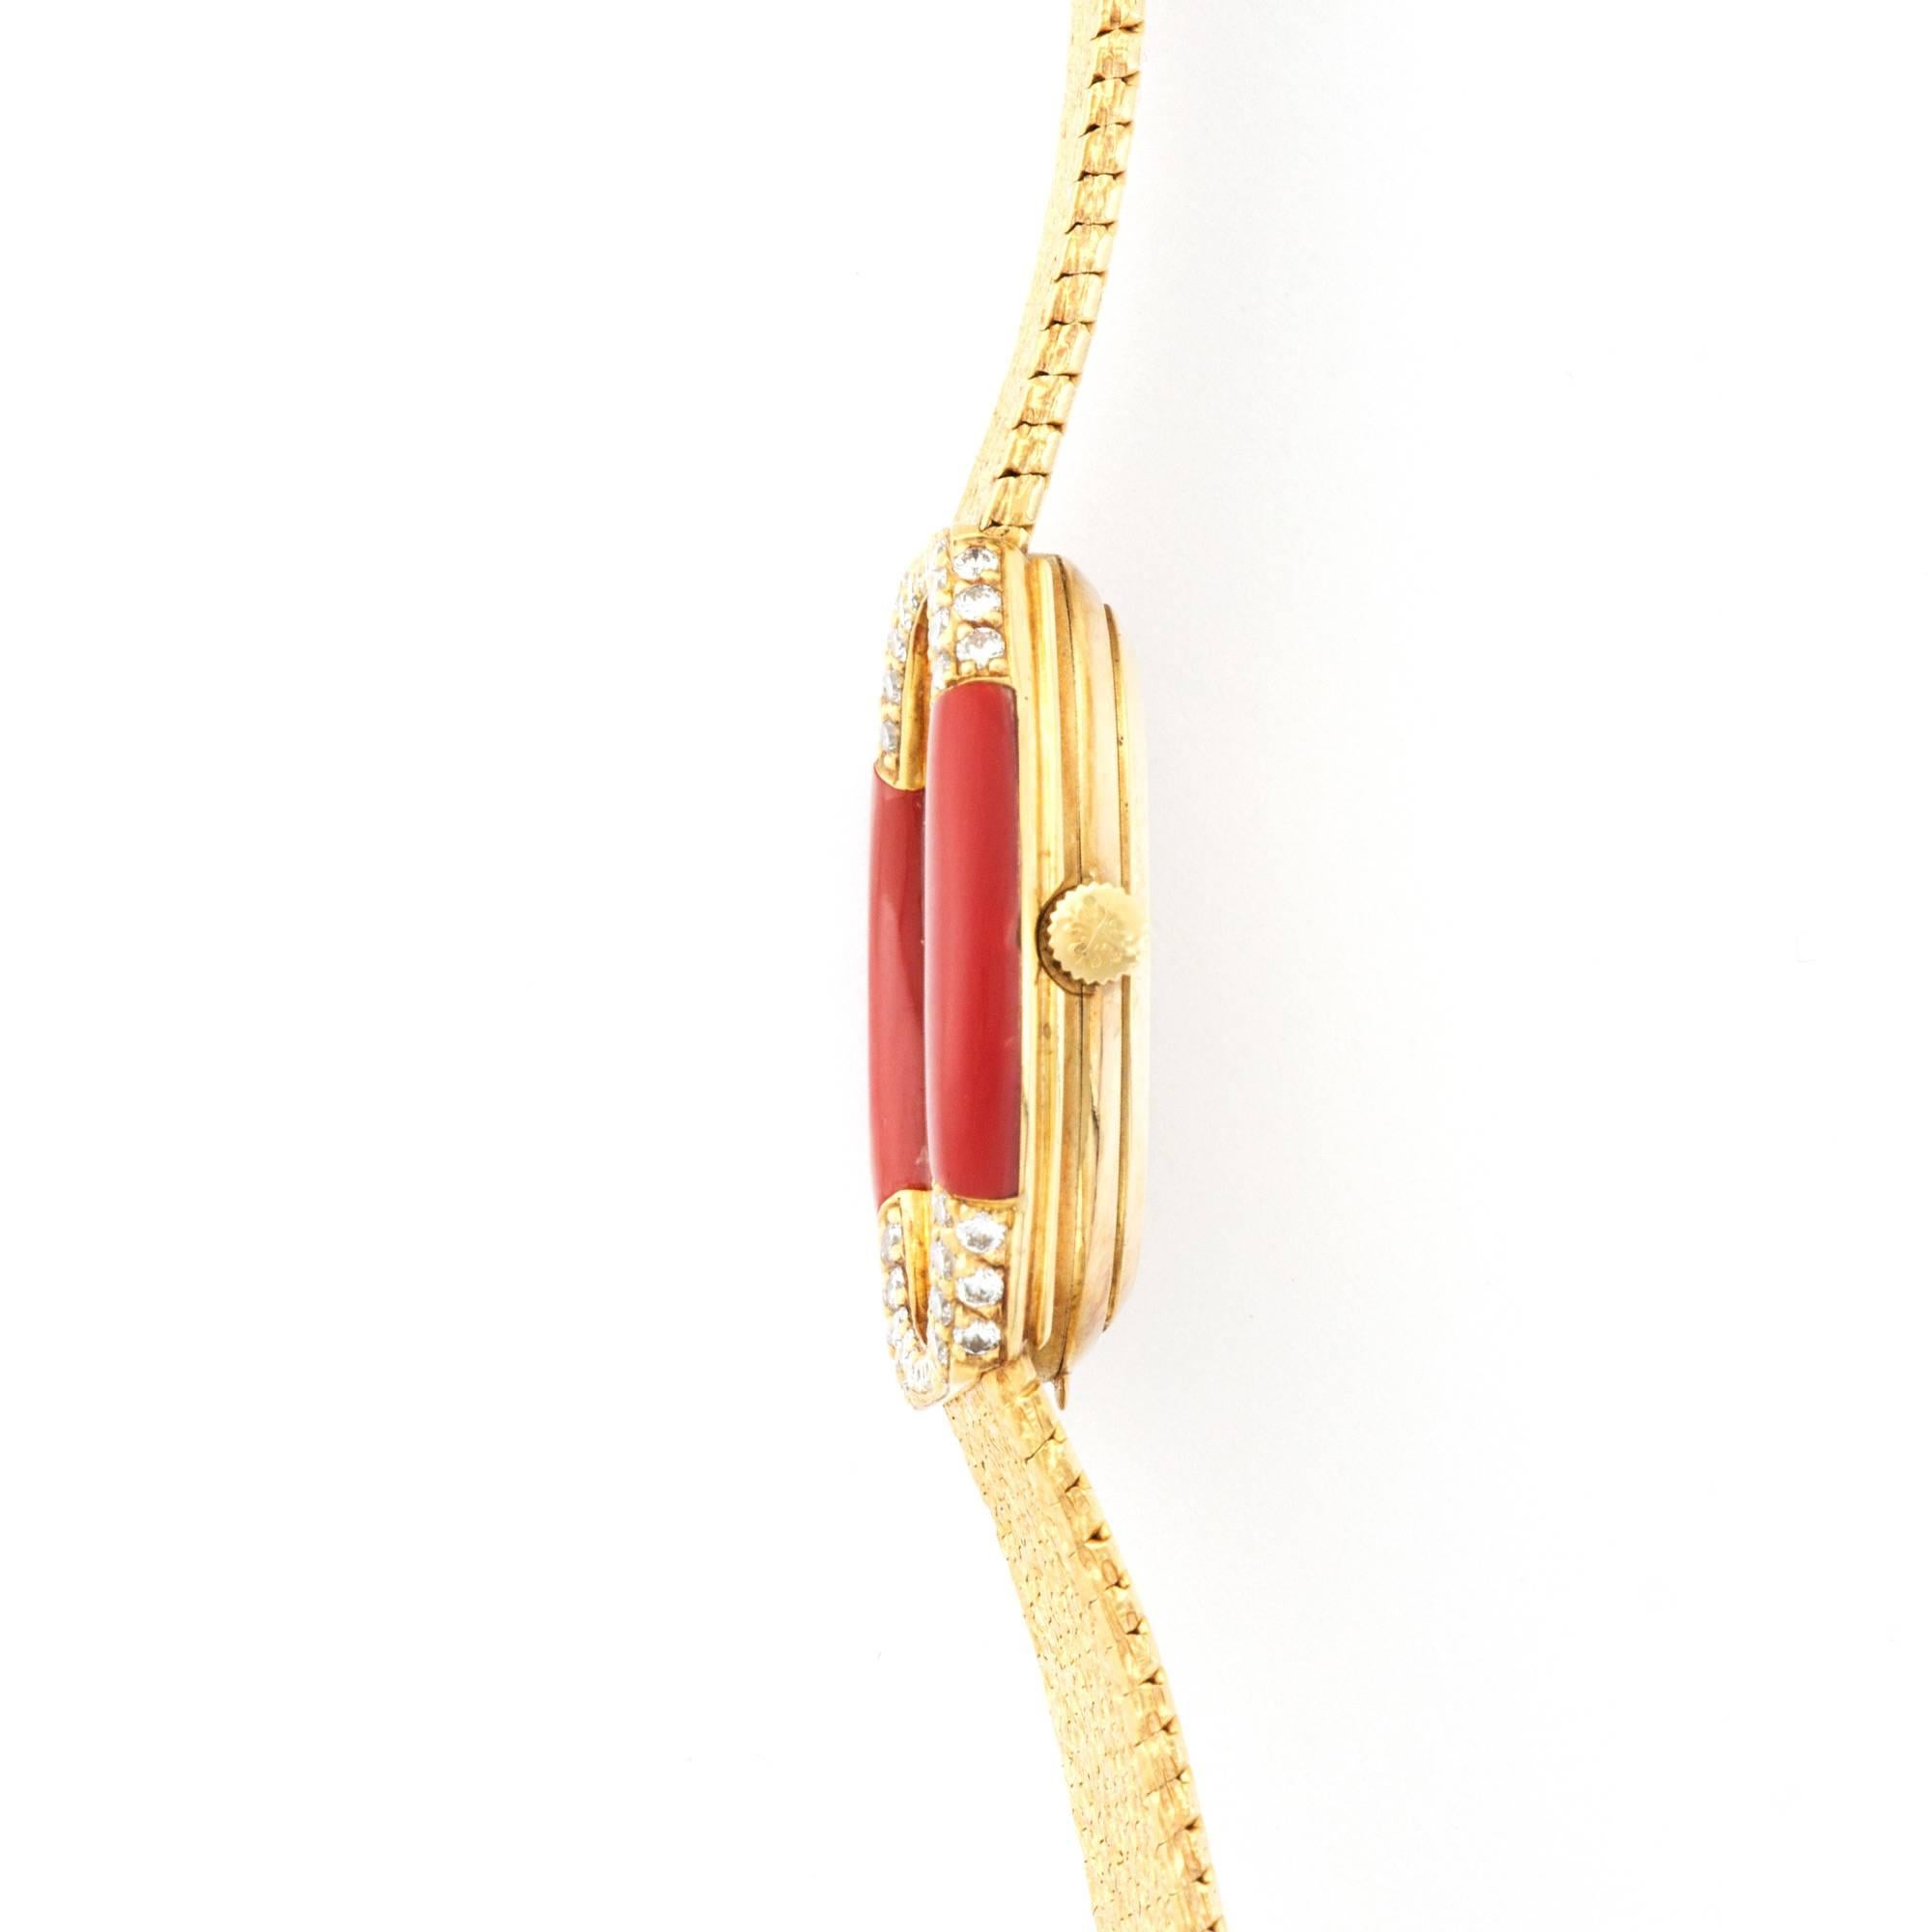 A  Yellow Gold Bracelet Watch with Red Coral, Onyx, and Diamonds, by Patek Philippe. Amazing Period Design. All Original.

Manual Wind Movement.

Patek Philippe Ref. 4362/1

Circa 1970's